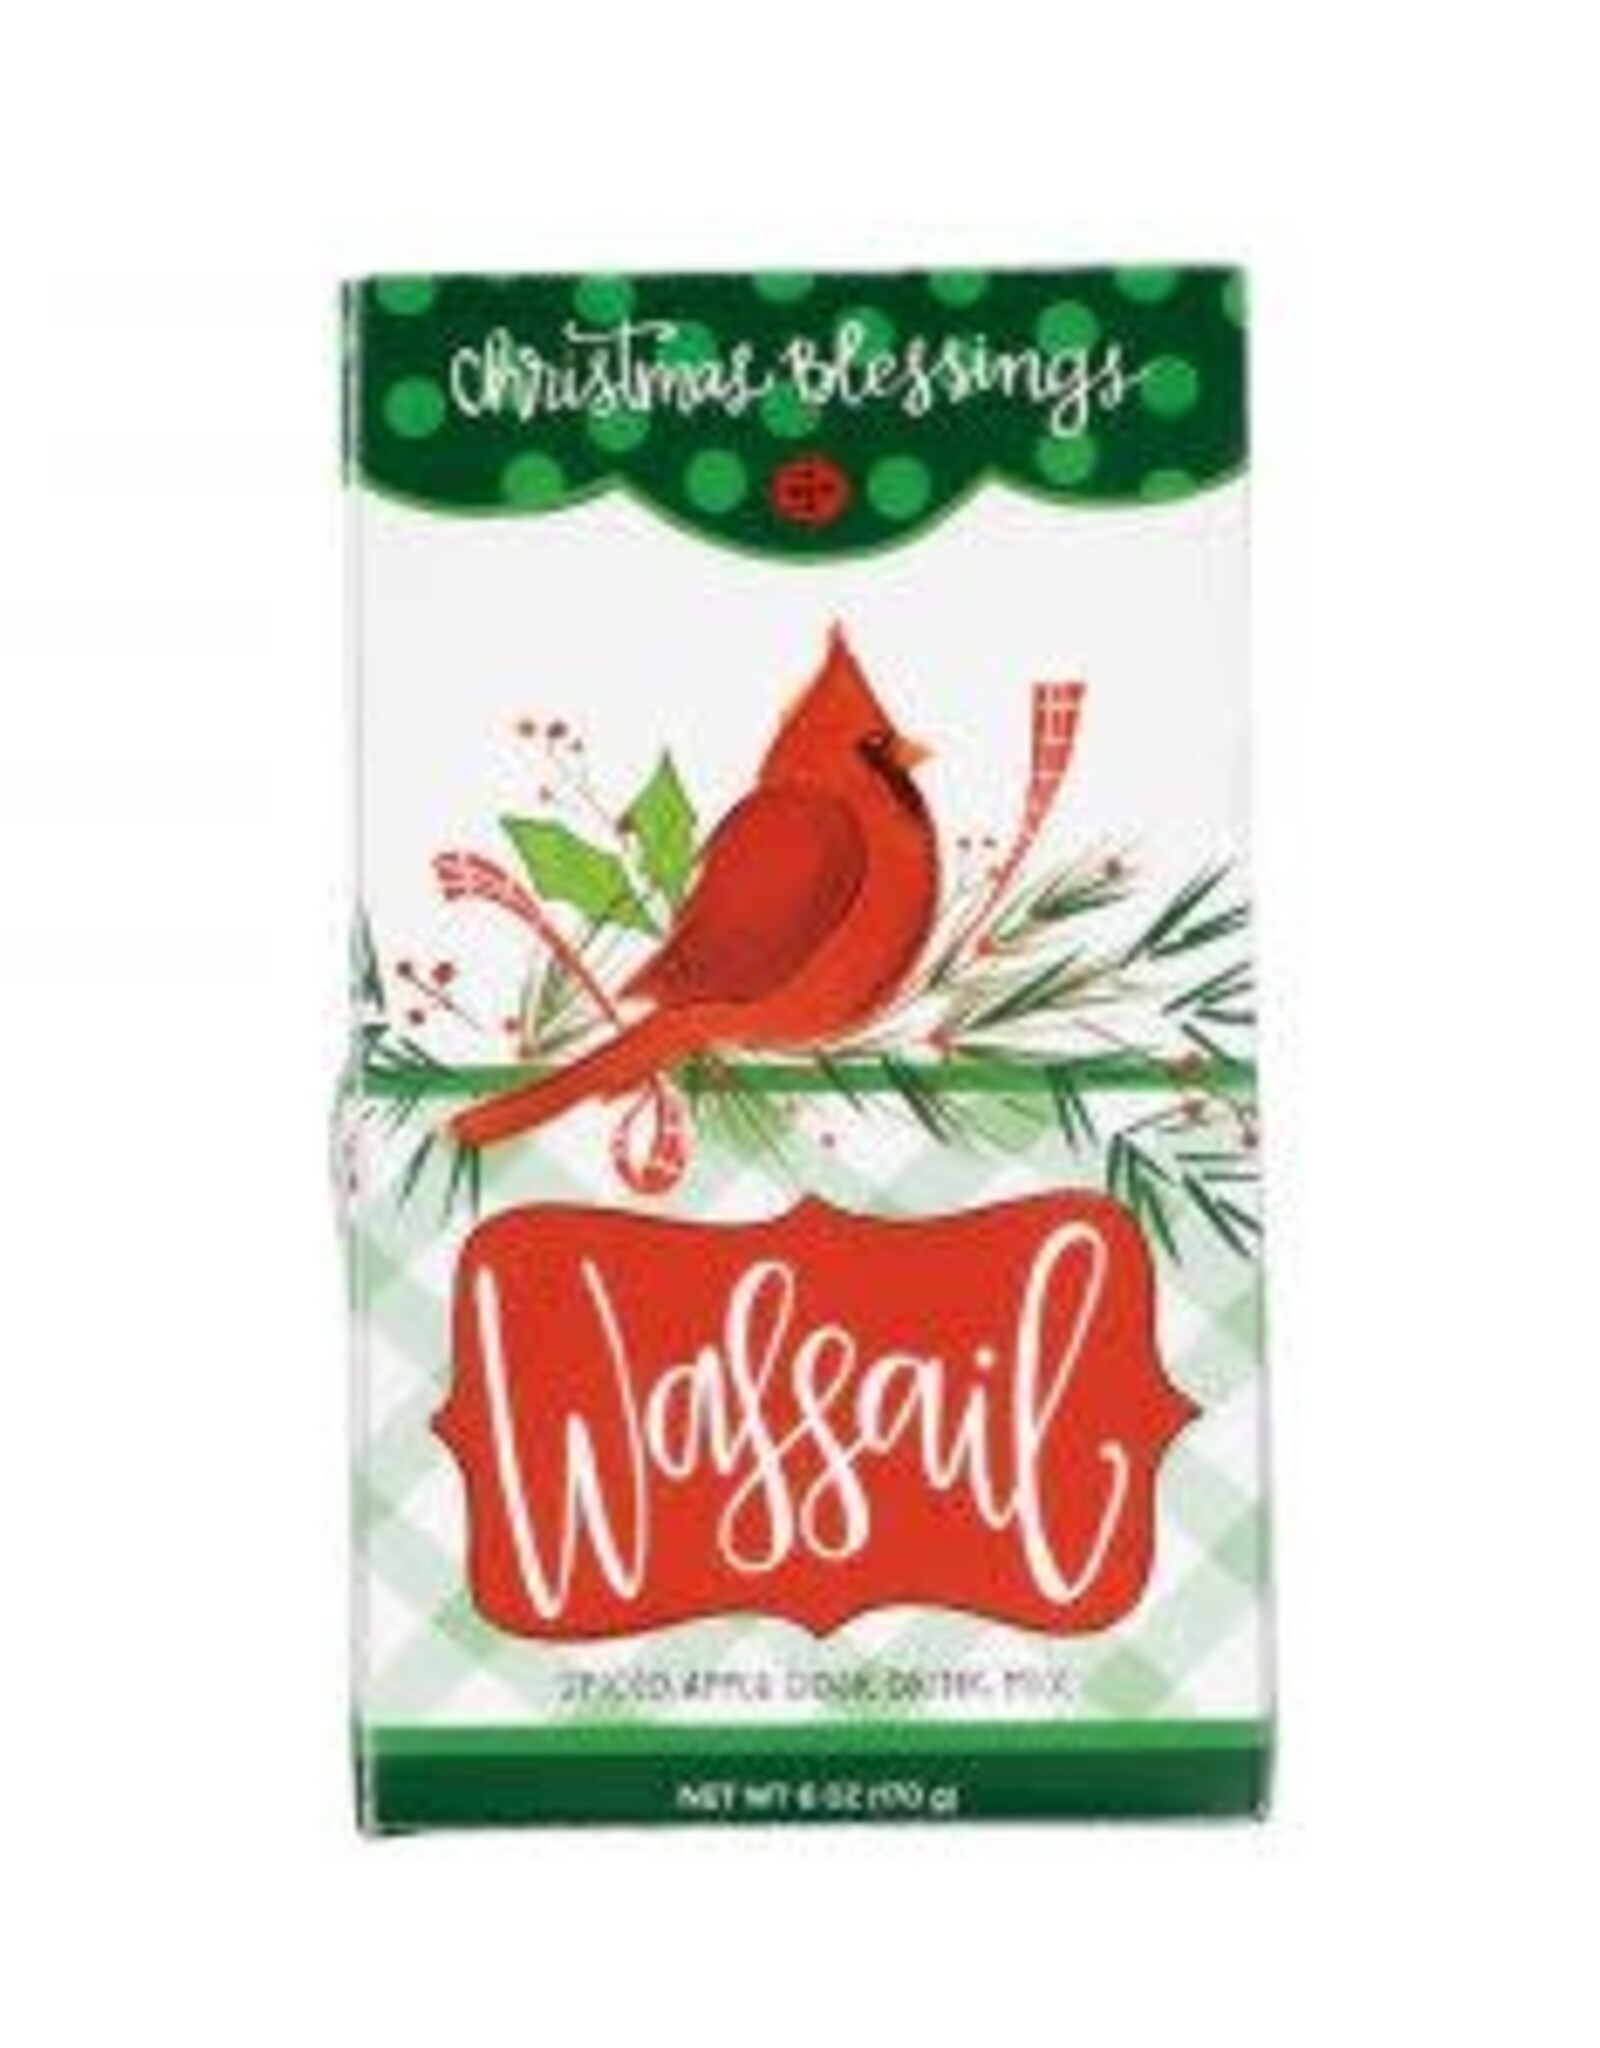 Christmas Shannon Road - Cardinal Christmas Blessings Wassail Drink Mix